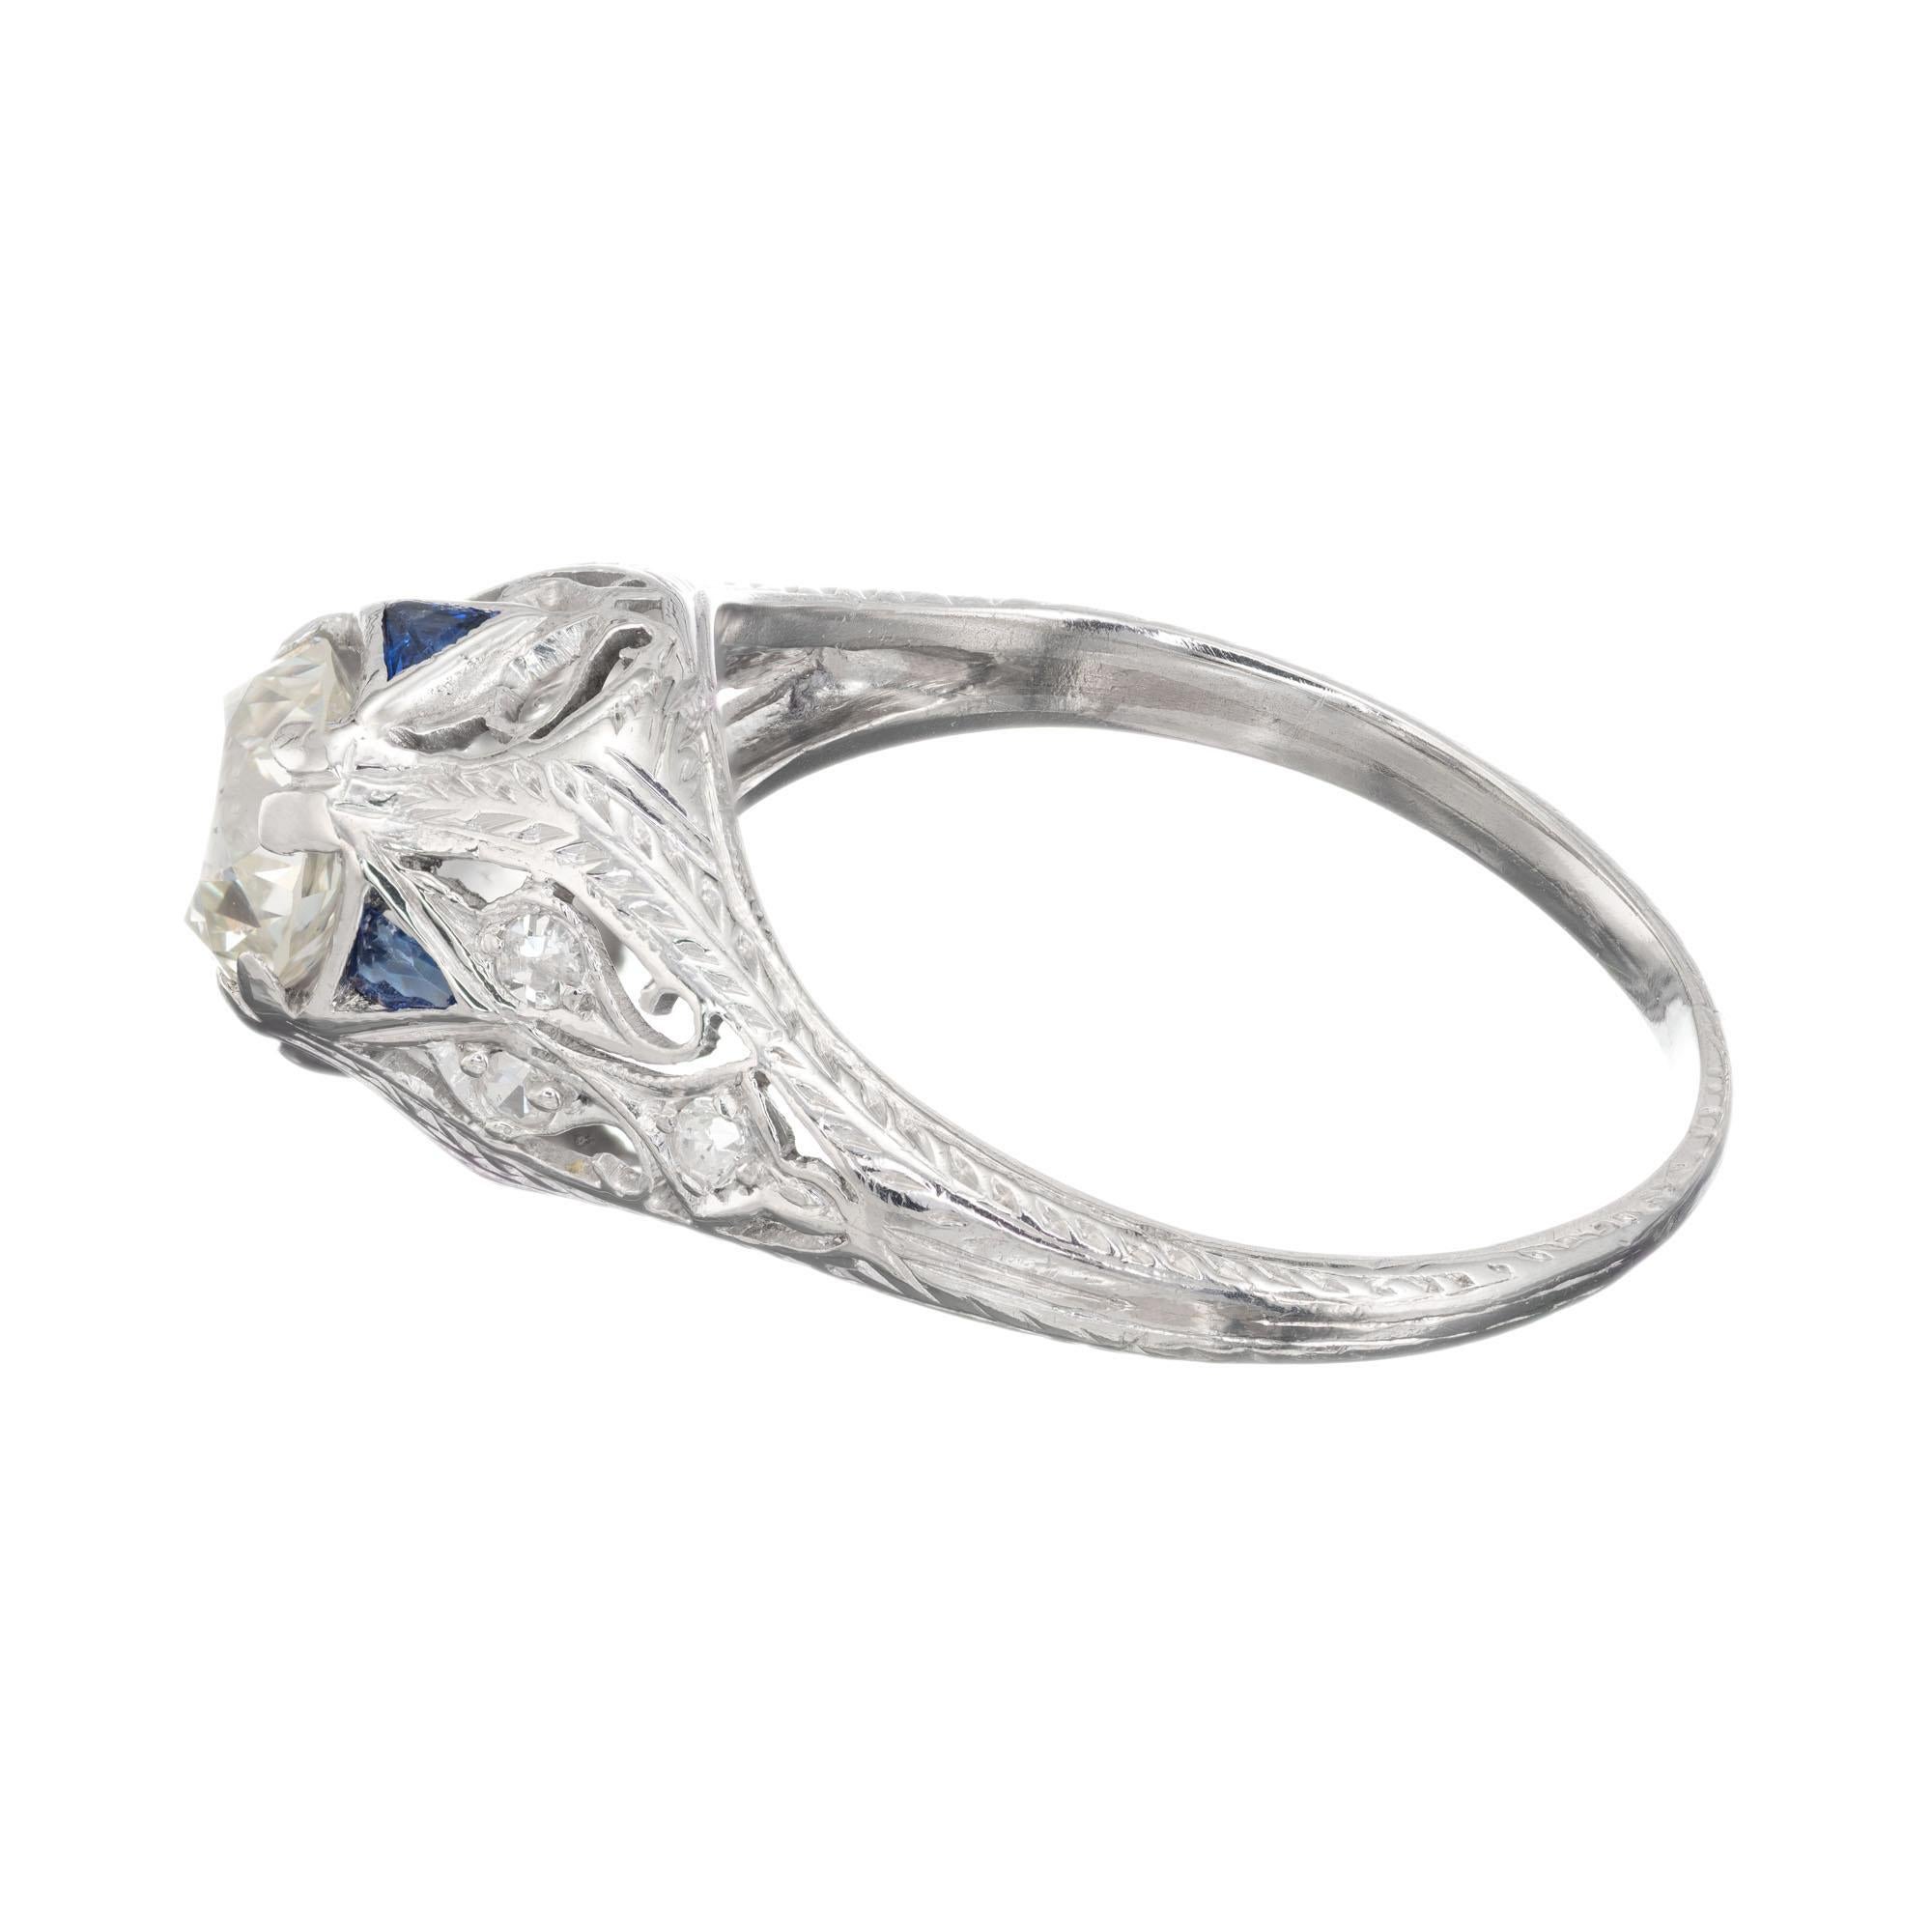 1.06 Carat Diamond Sapphire Platinum Engraved Engagement Ring In Good Condition For Sale In Stamford, CT